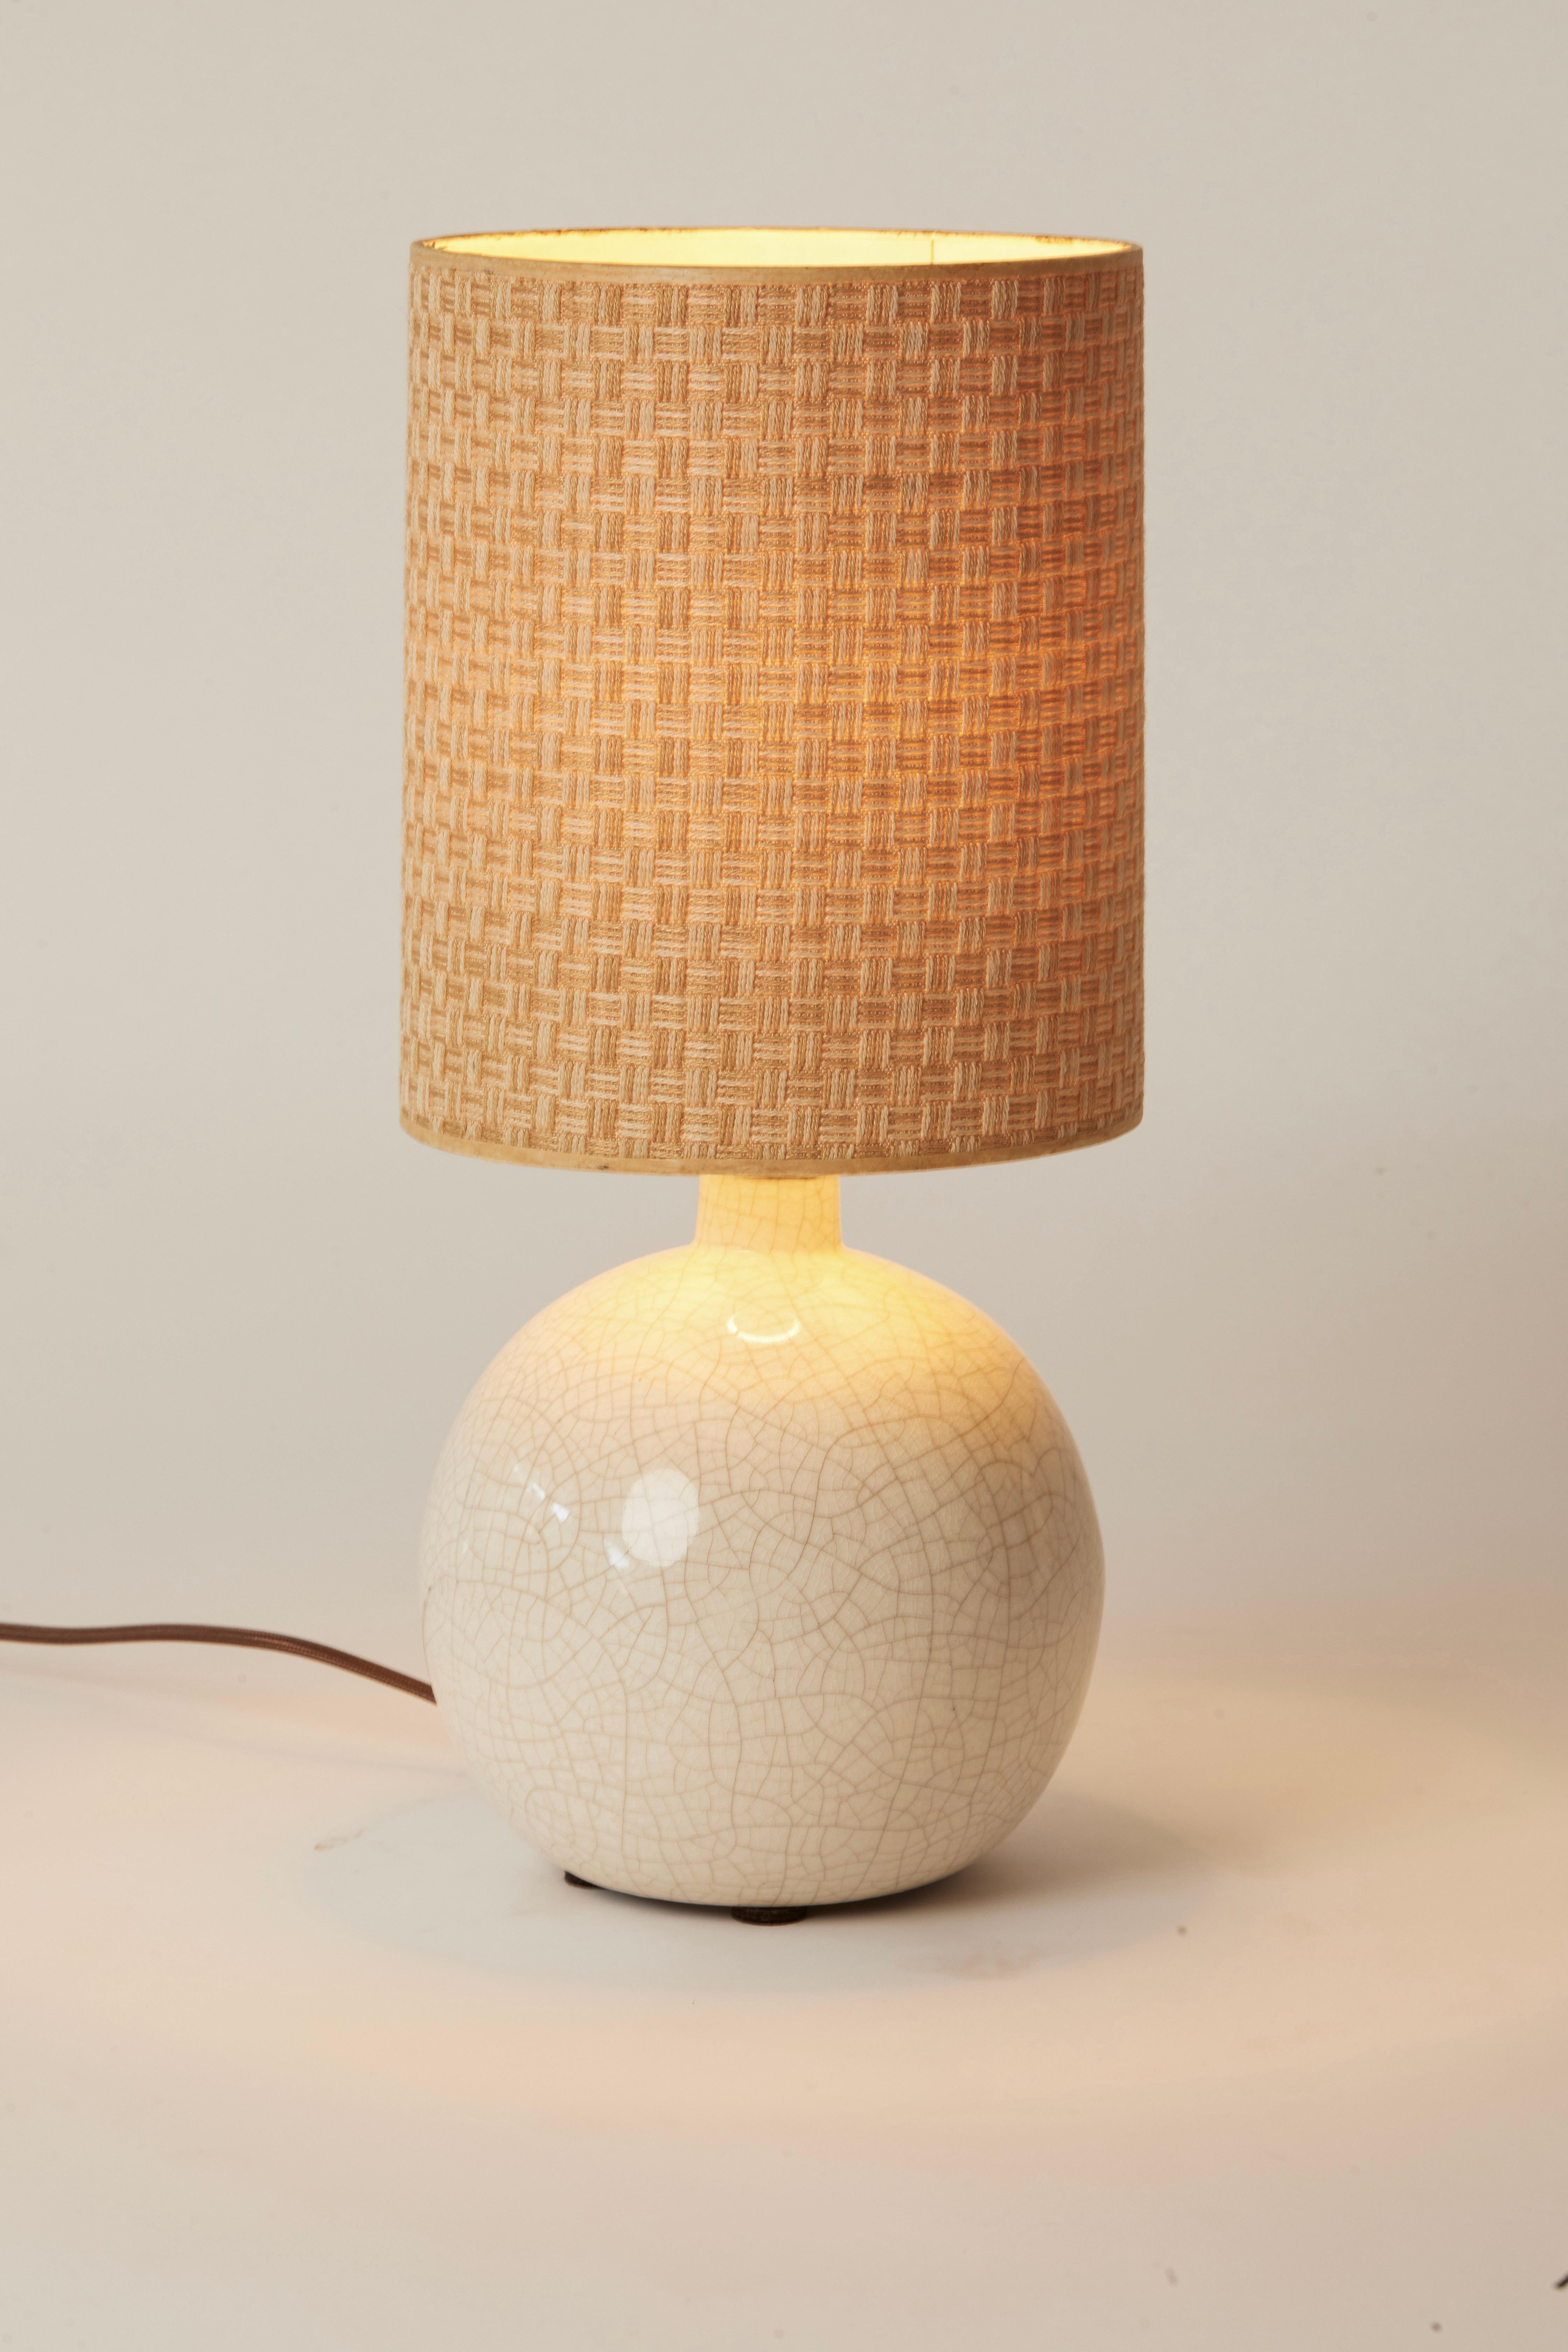 European 1970s Small White Crackled Table Lamp with Original Brown Woven Lampshade For Sale